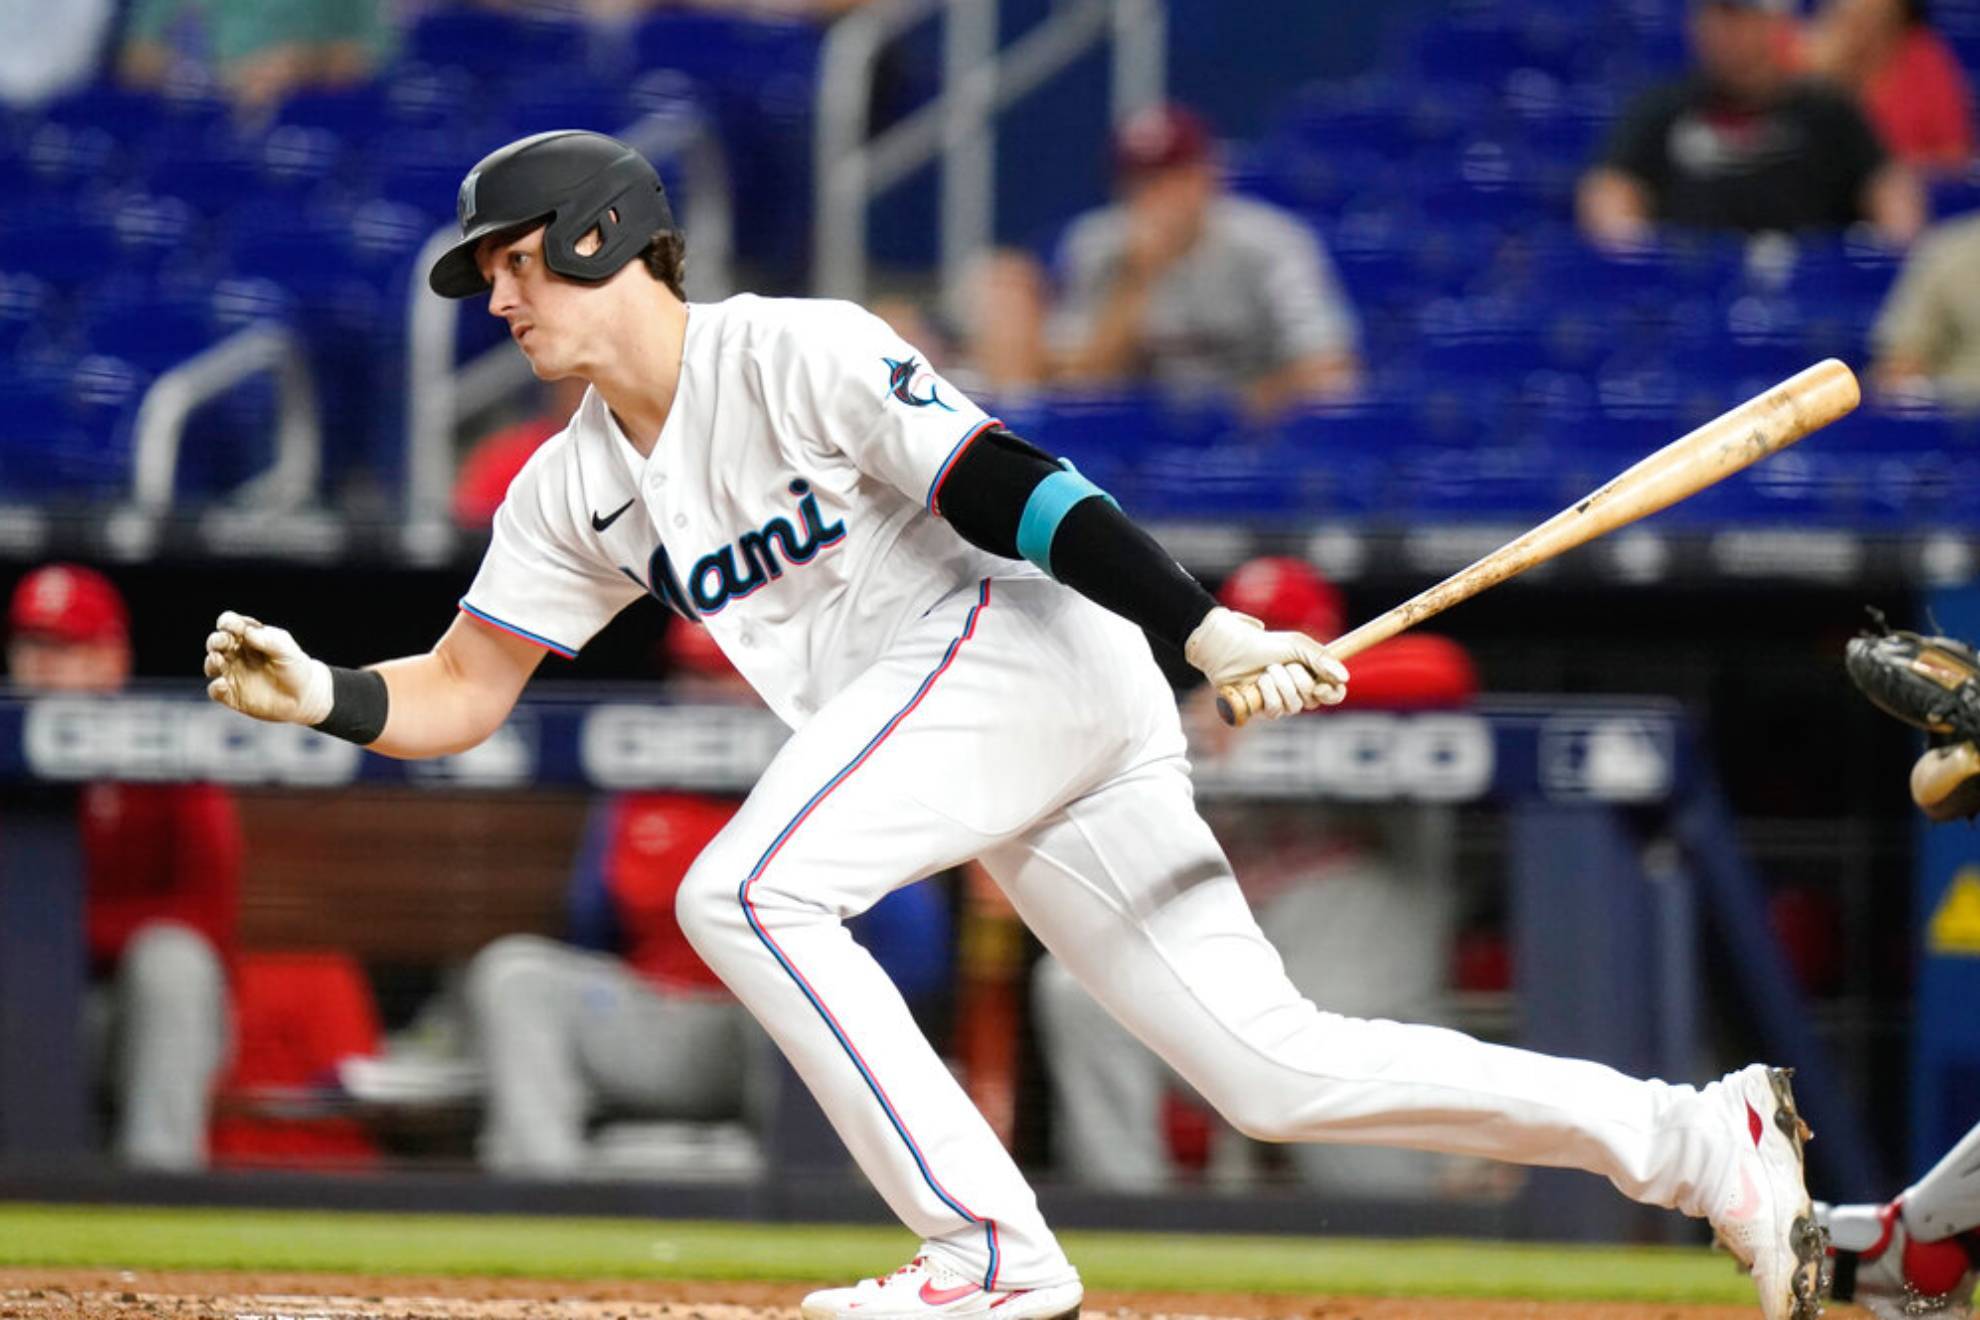 Miami Marlins' Brian Anderson follows through after hitting a single during the first inning of a baseball game against the Philadelphia Phillies